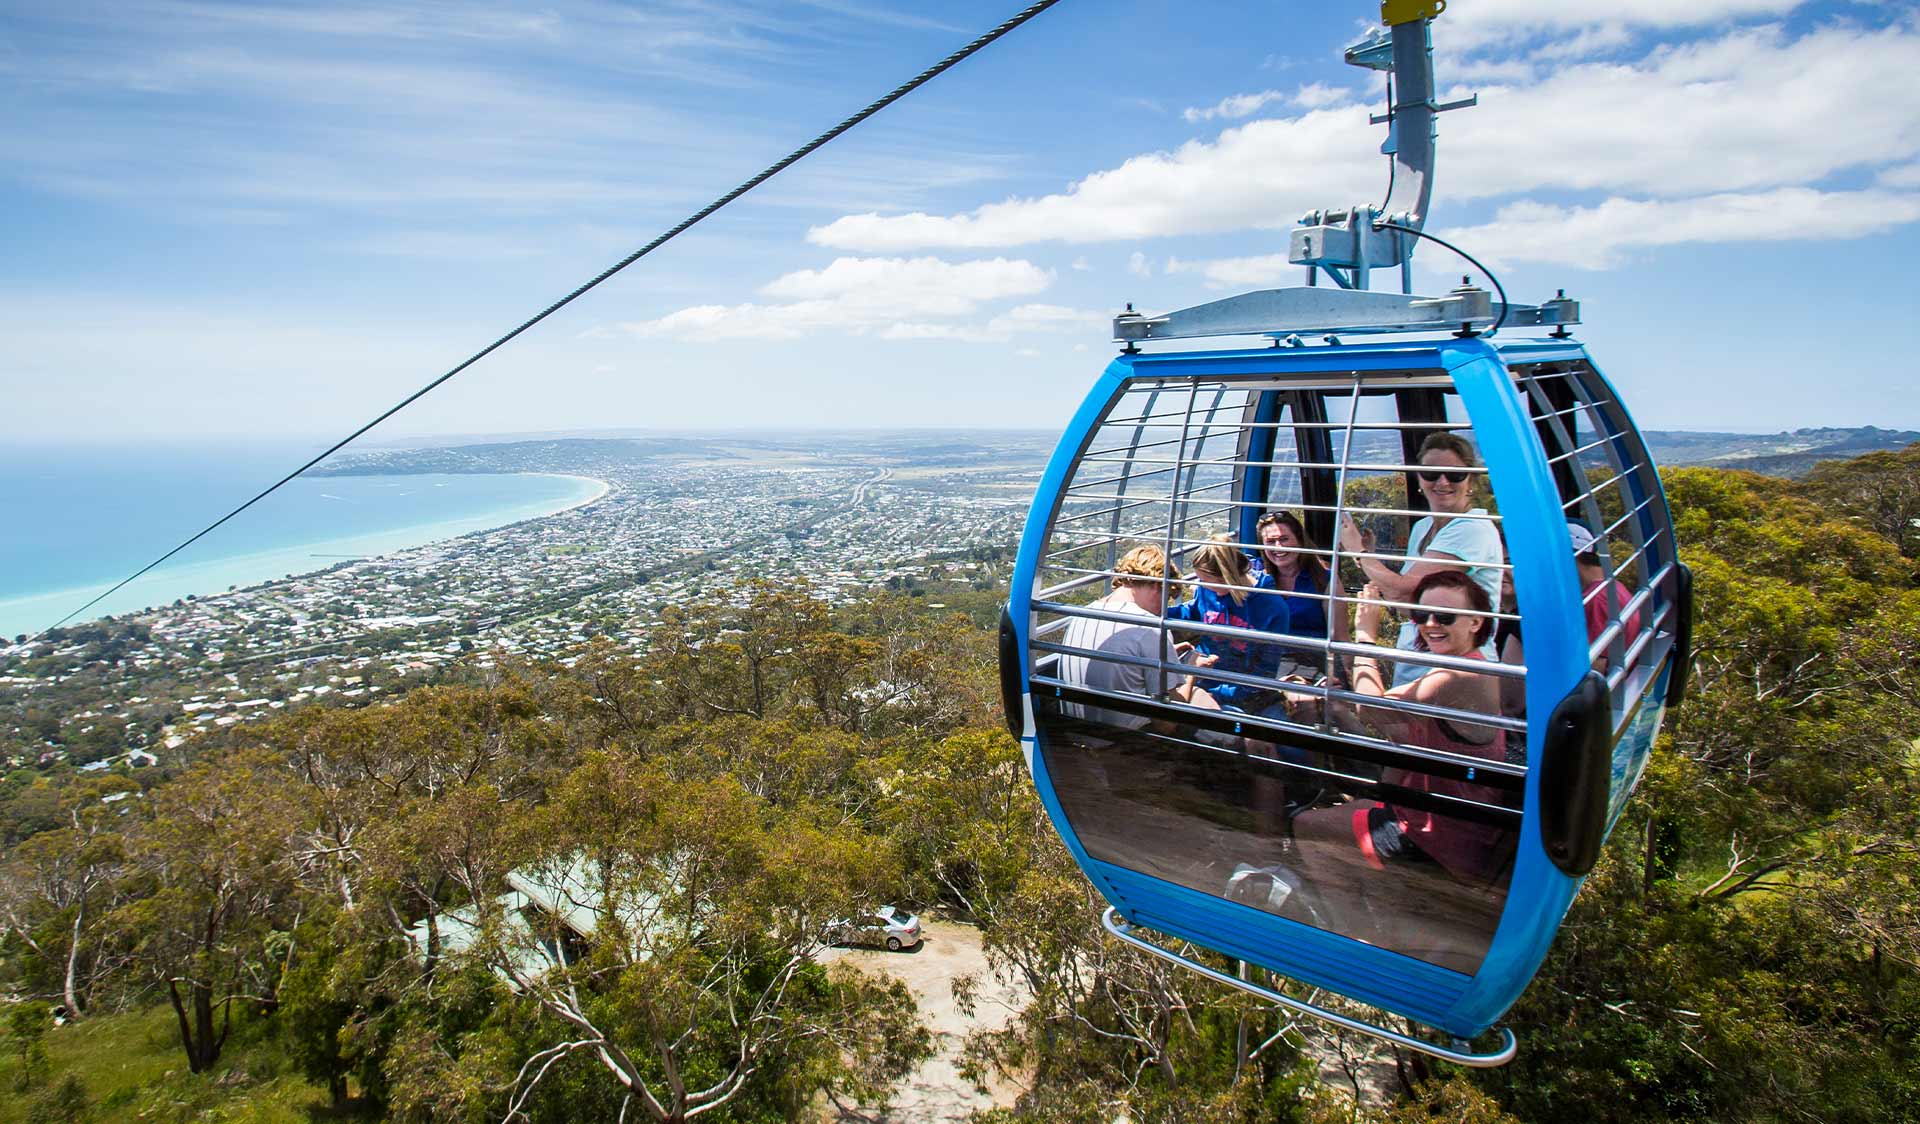 Eagle - the chairlift / gondola takes visitors to the top of Arthurs Seat State Park. 